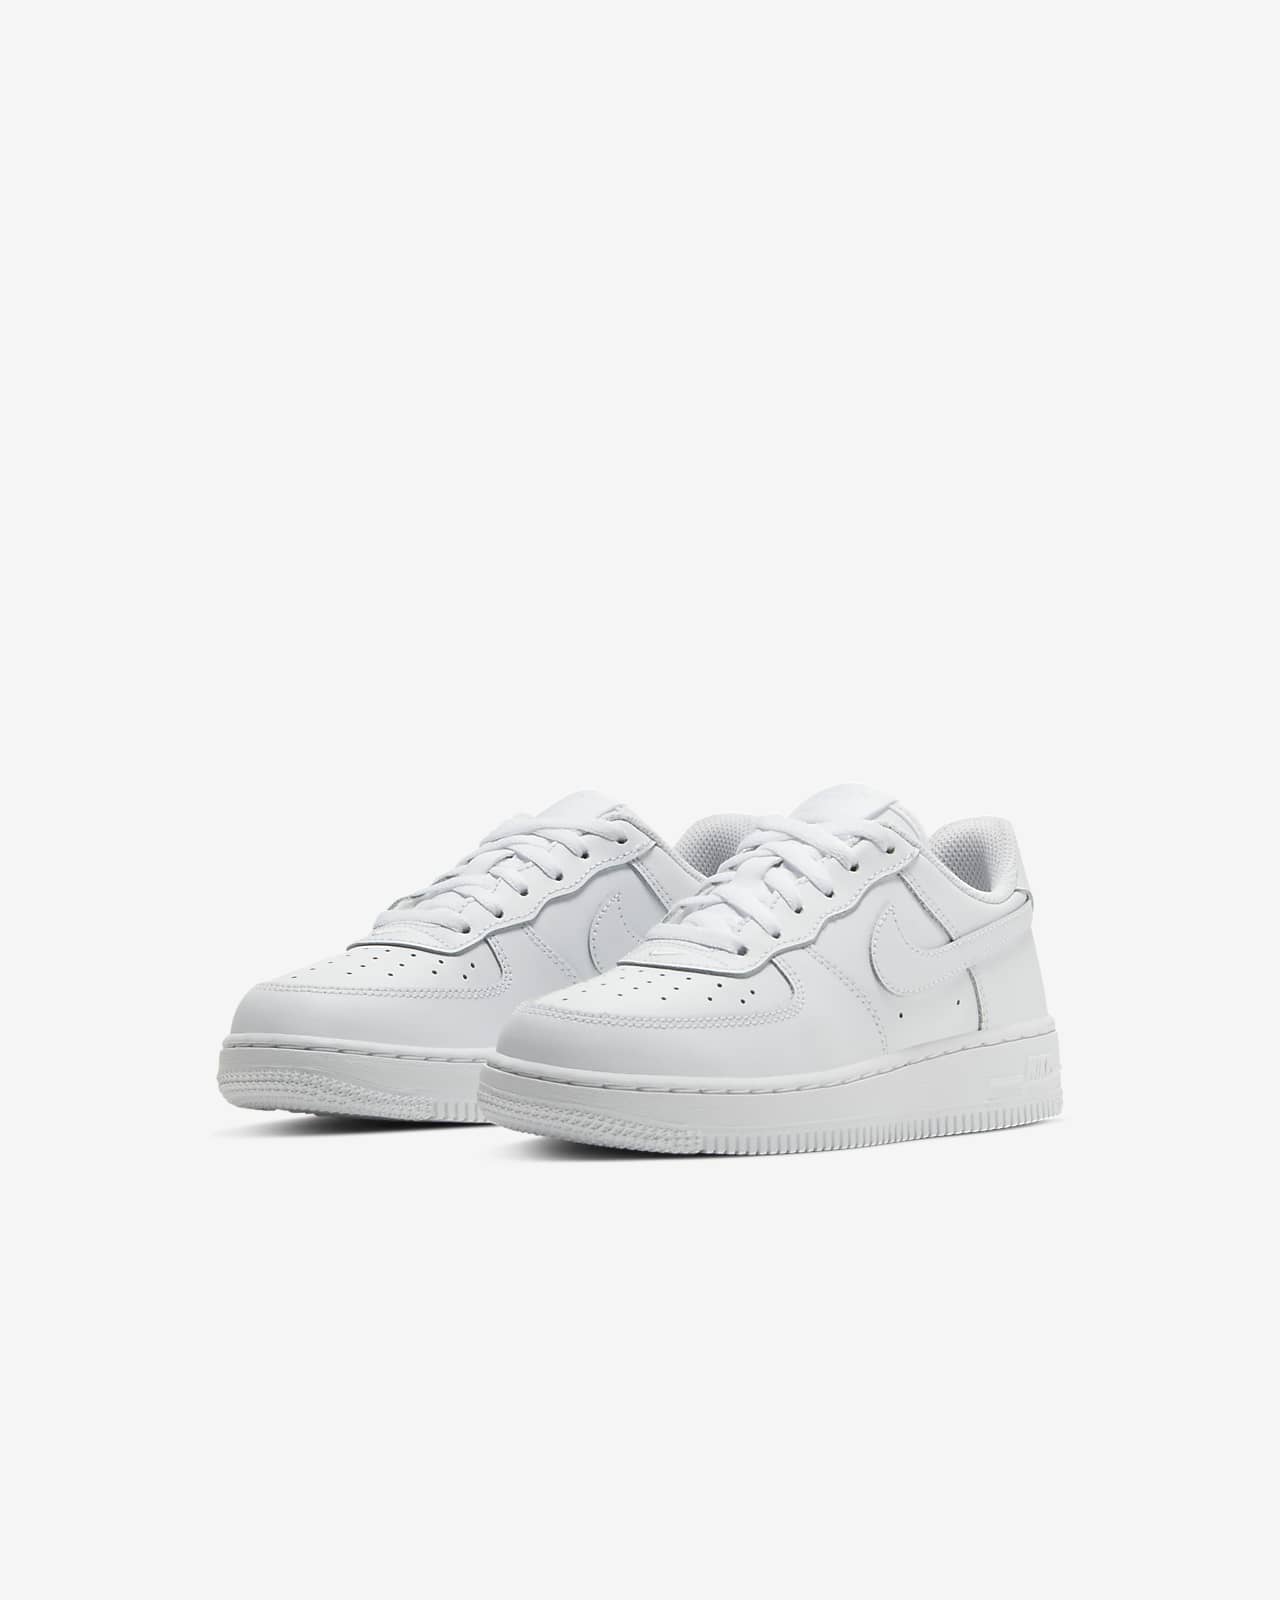 nike forces kids